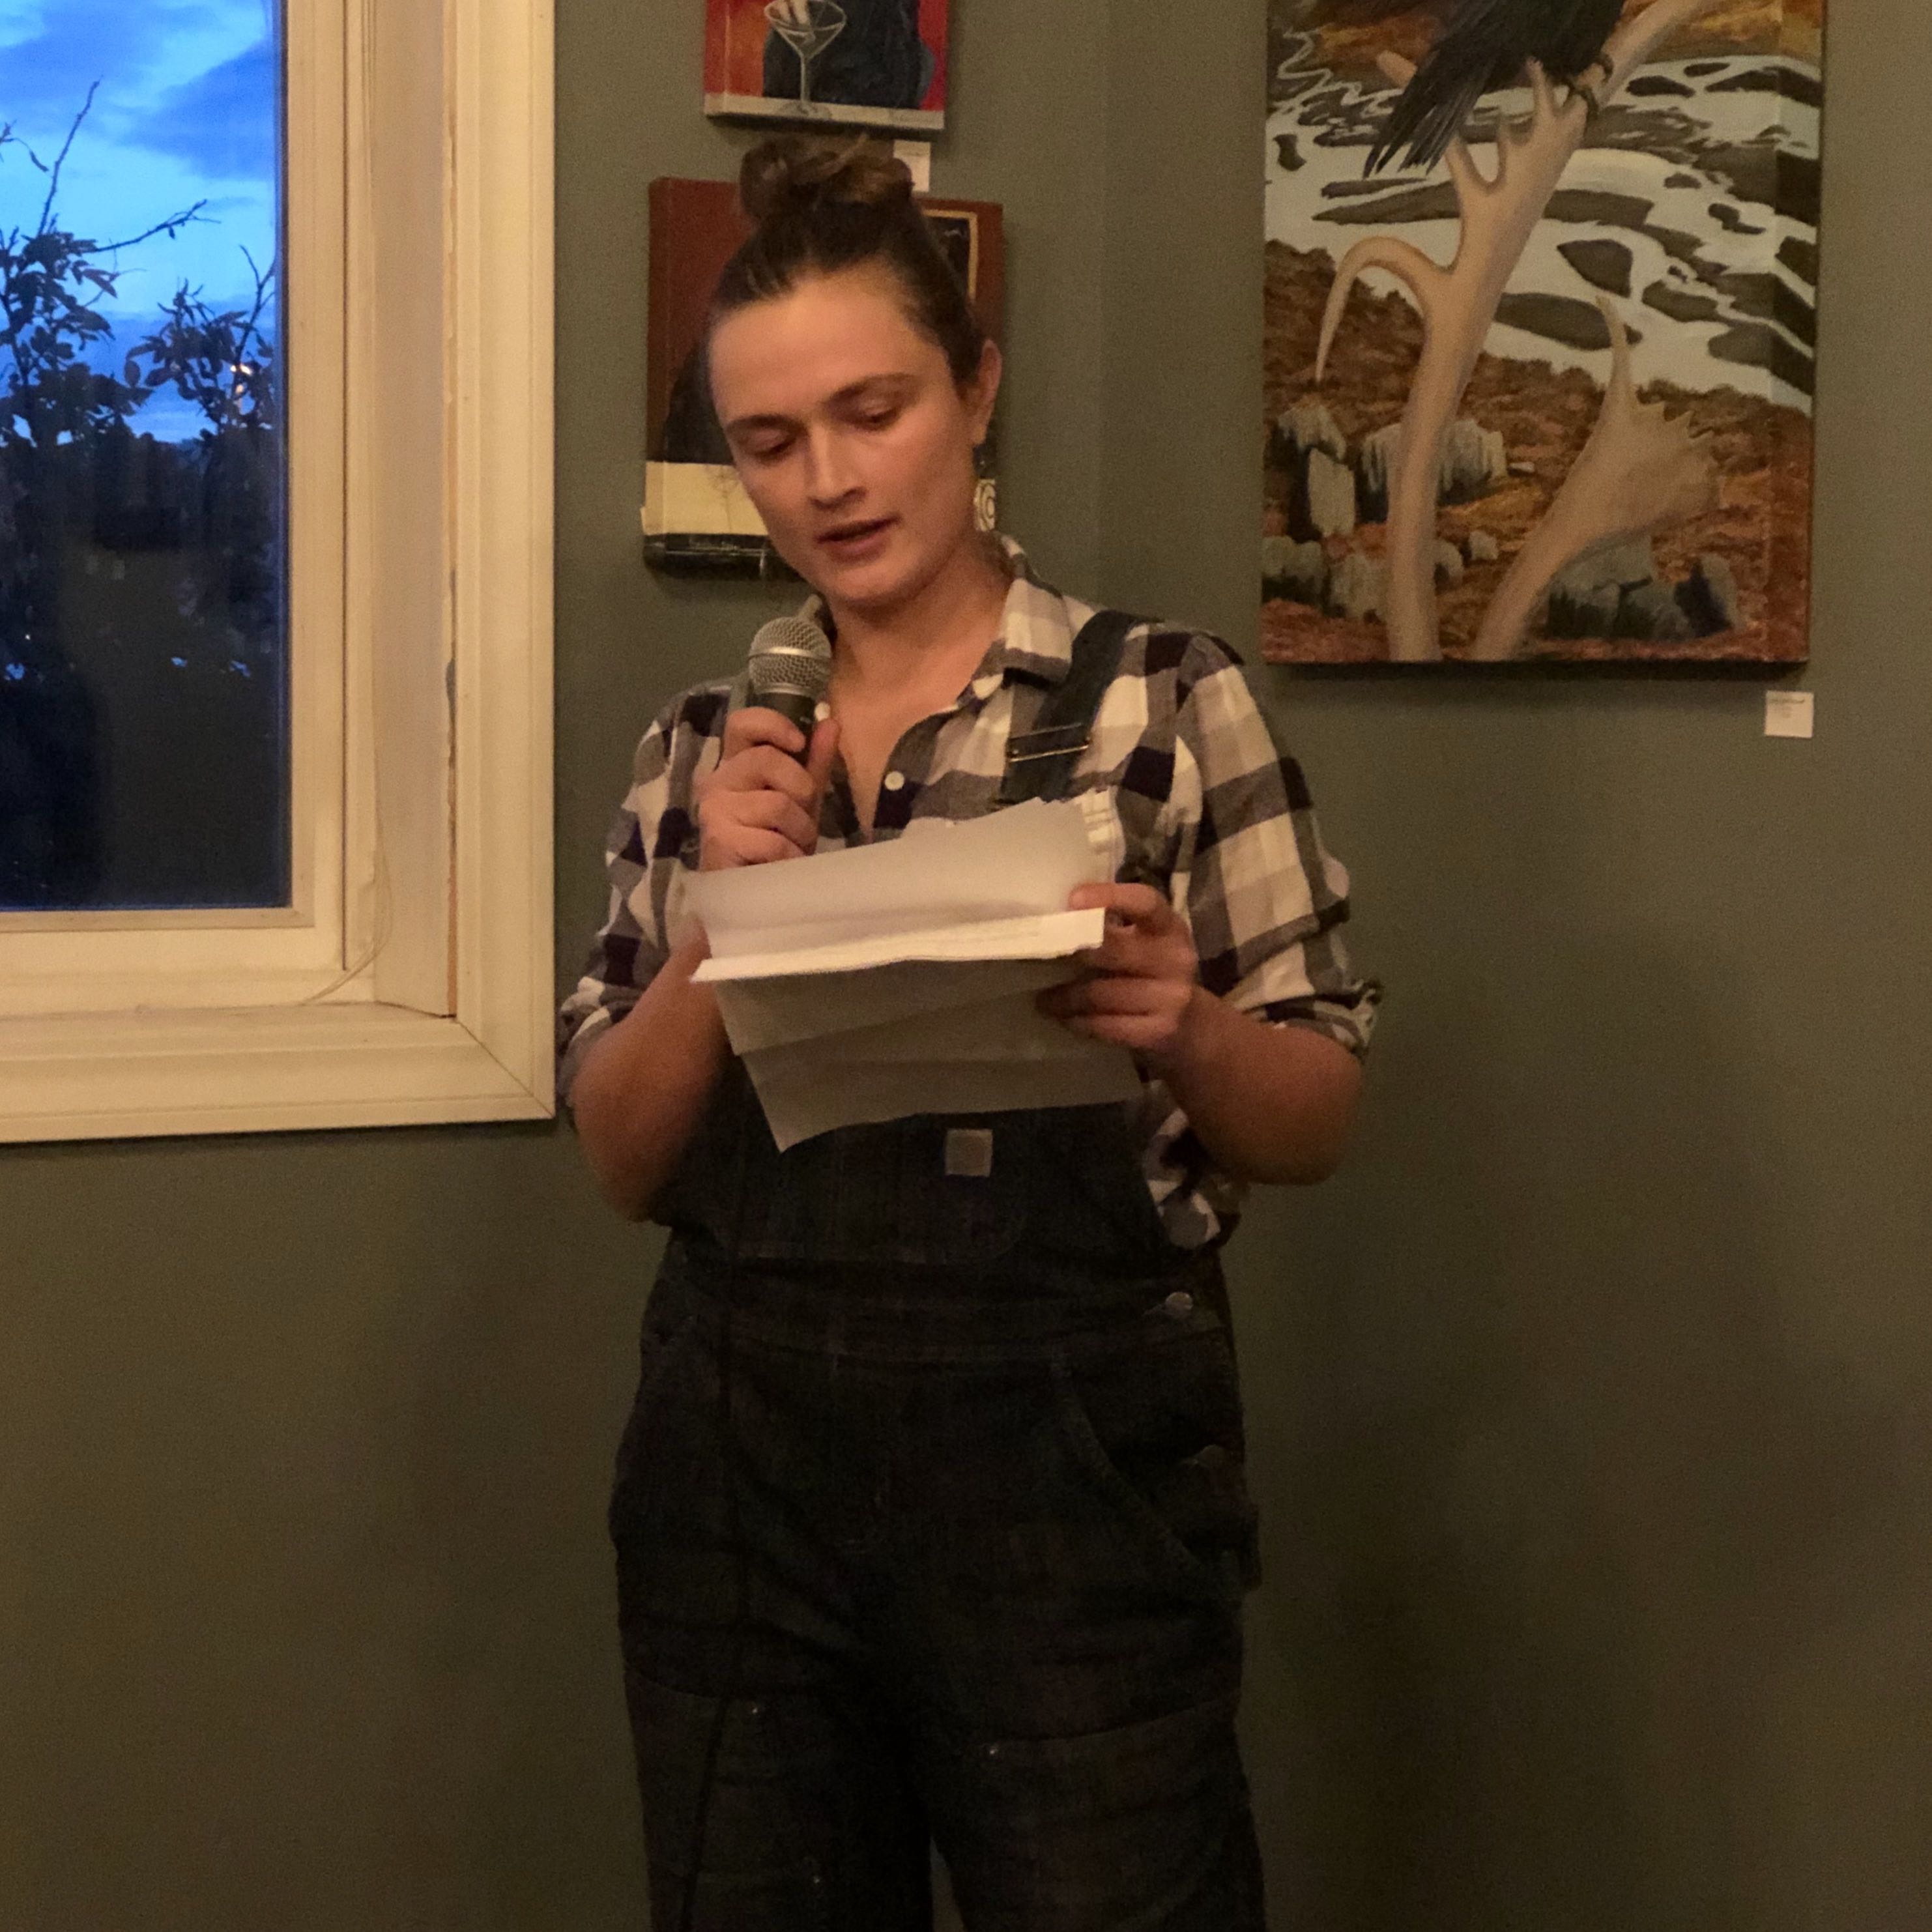 Keely O'Connell reads her nonfiction at an event in 2019. She wears denim overalls and a checkered shirt. She is holding a microphone.